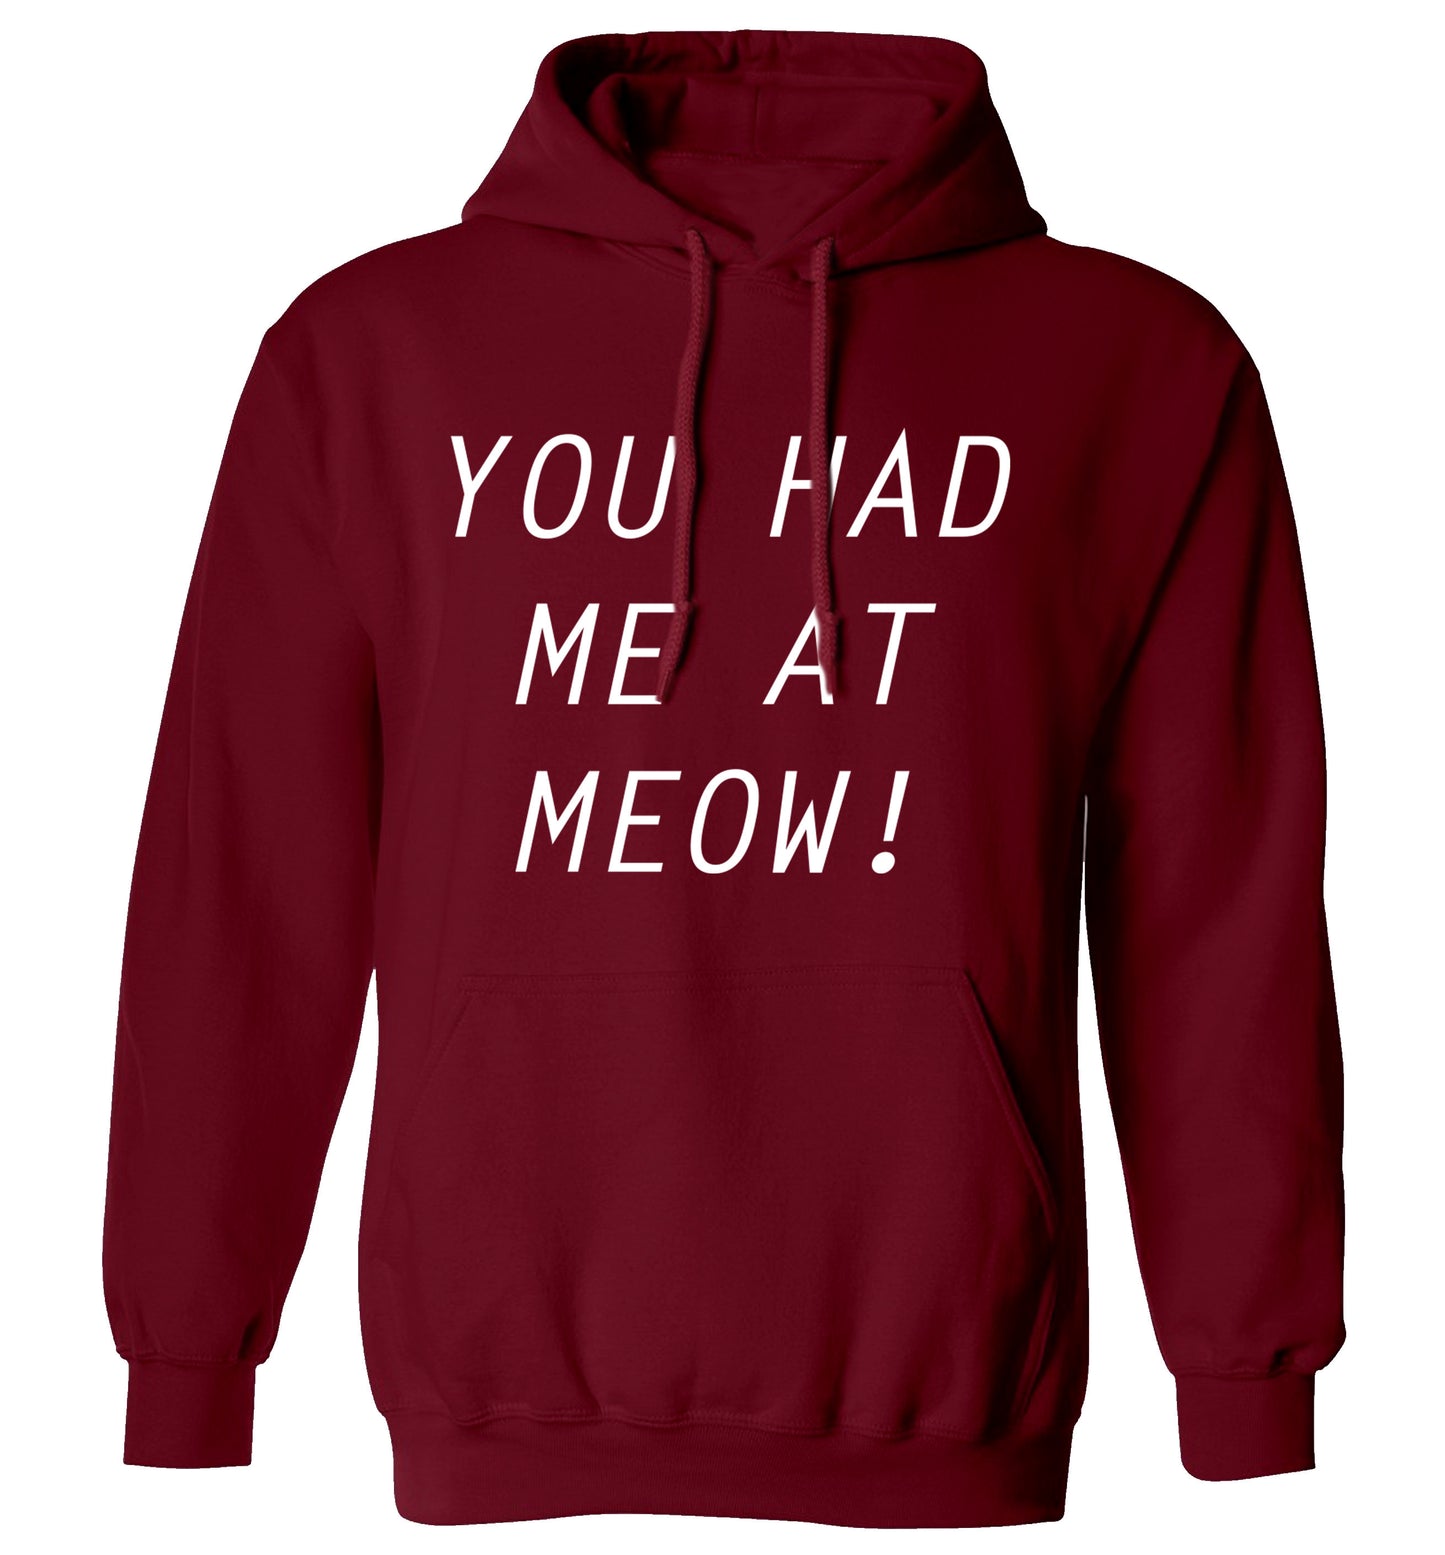 You had me at meow adults unisex maroon hoodie 2XL